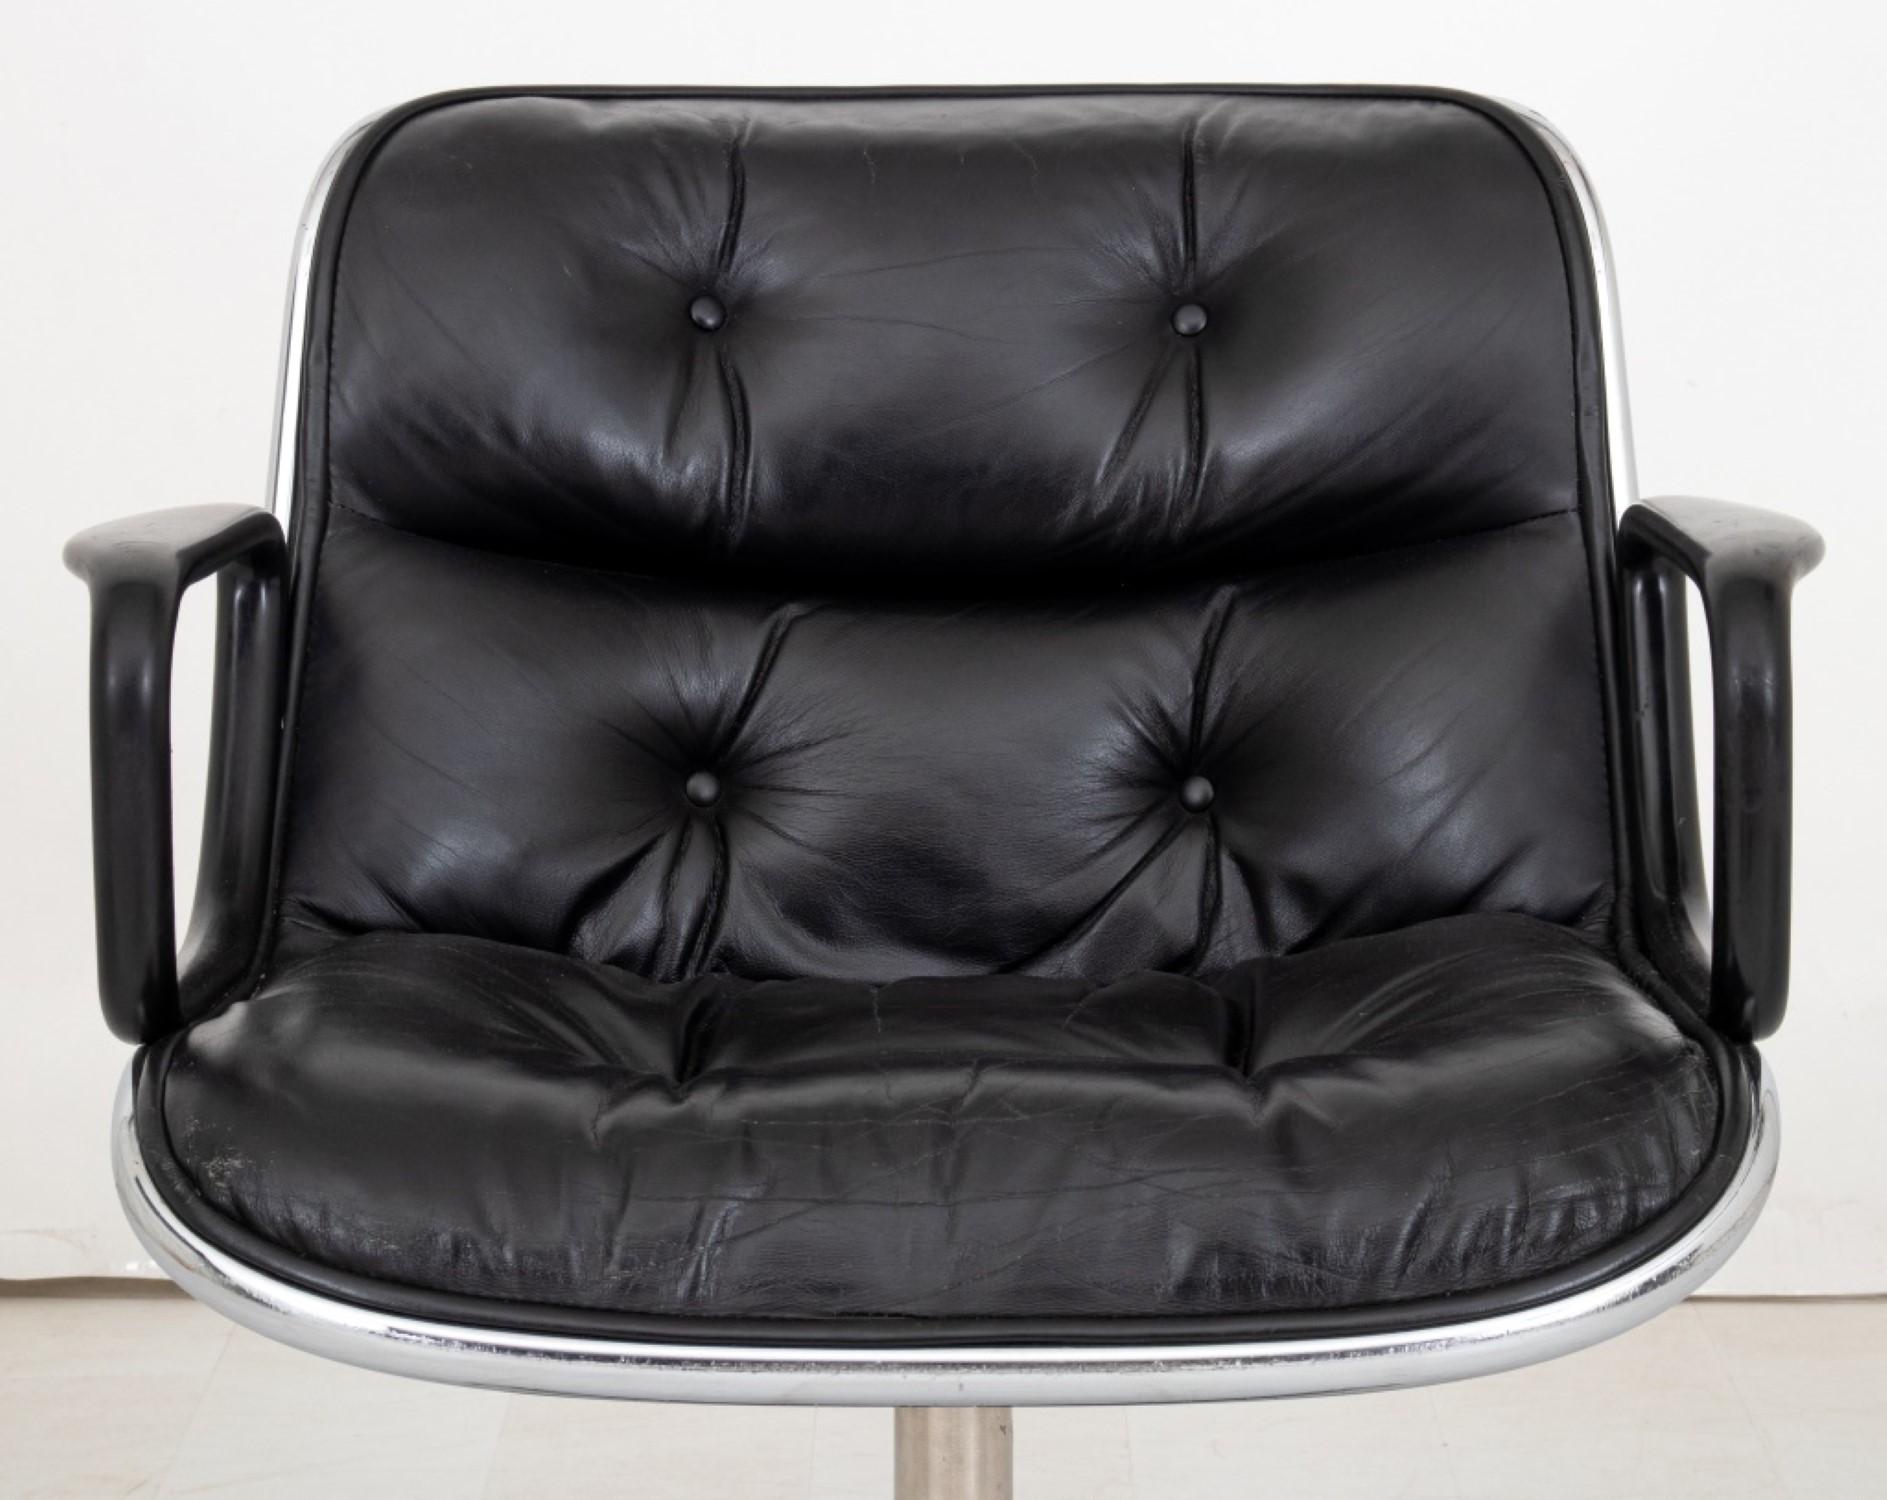 Charles Pollock Executive Office Chair for Knoll International (1963)

Design: Button-tufted black leather seat and backing on a chrome base with four casters.

Dimensions: 32.25